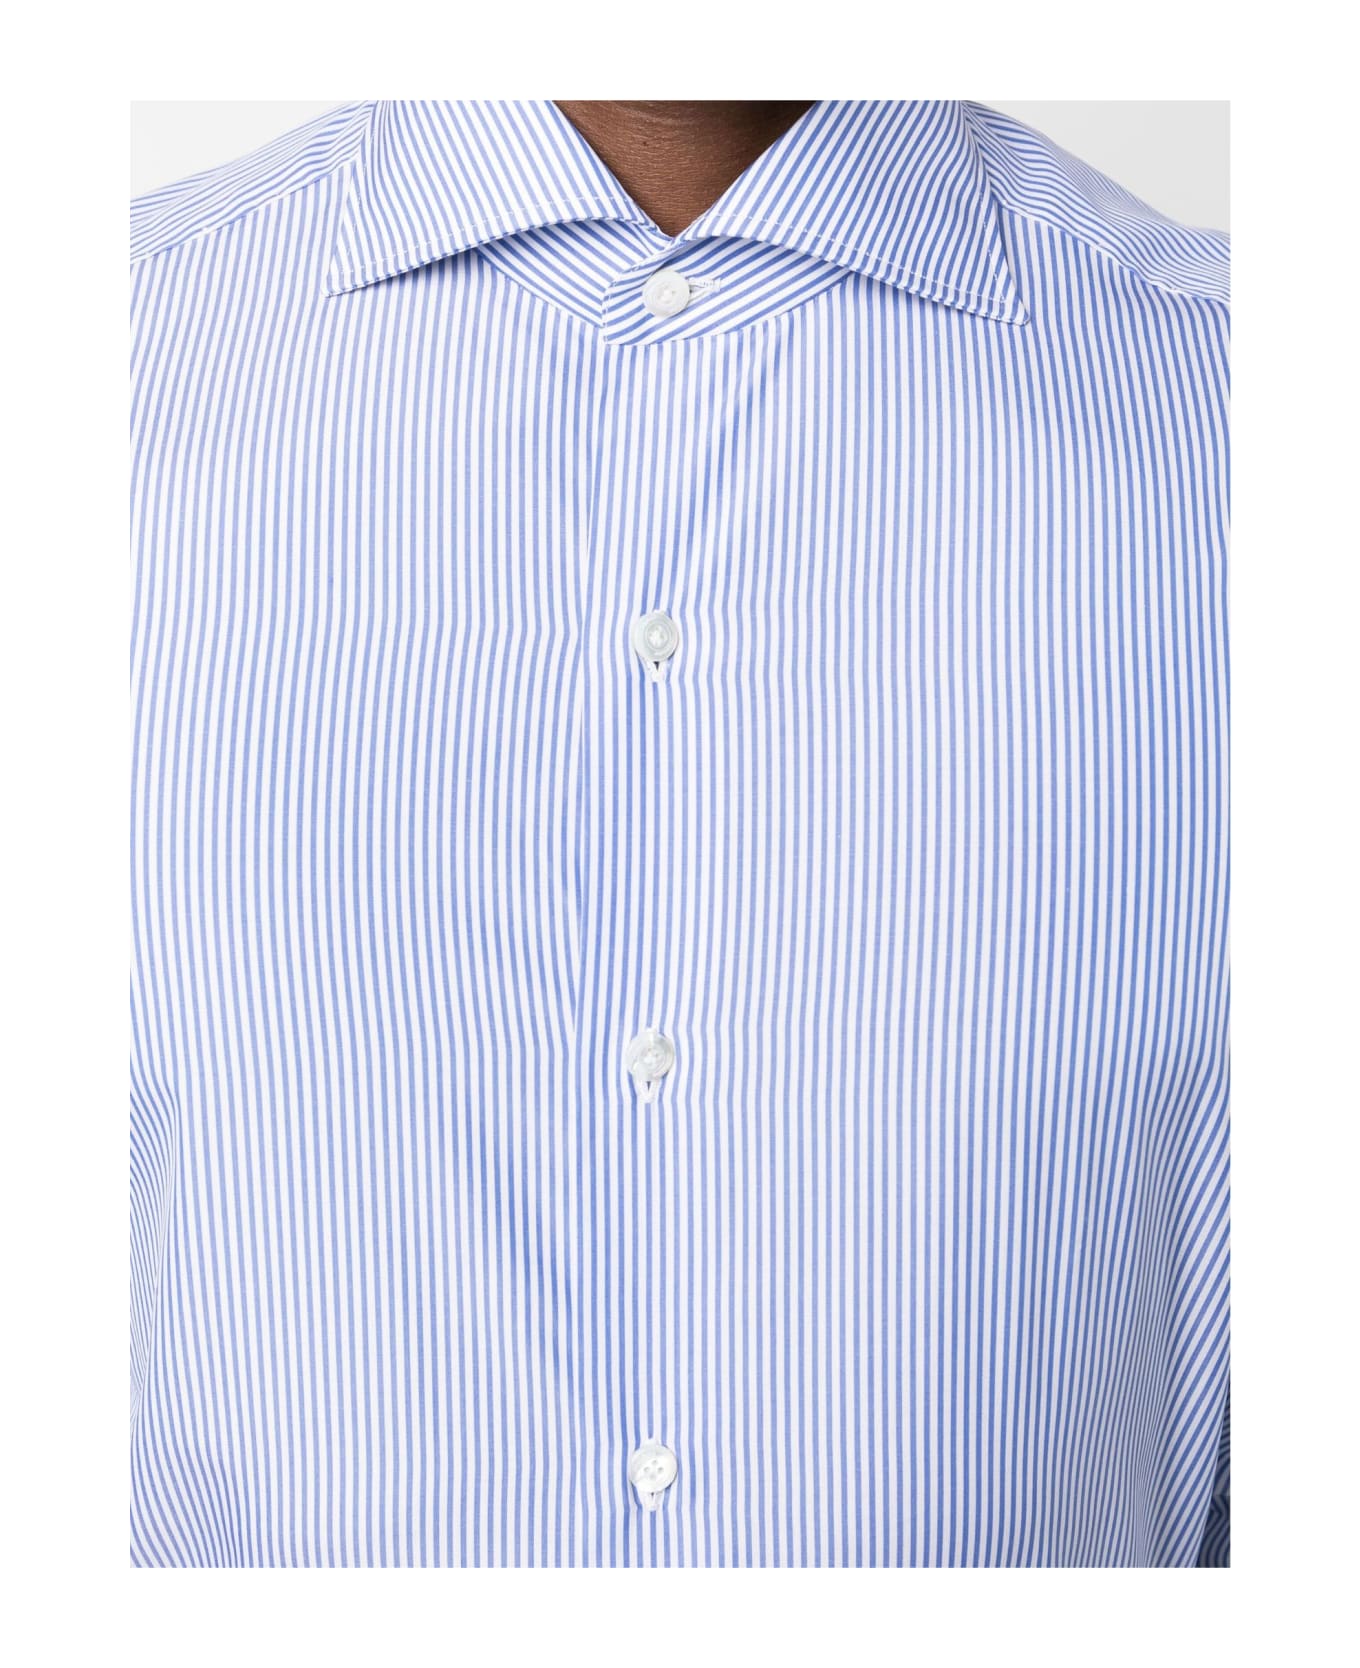 Finamore Royal Blue And White Cotton Shirt - Blue